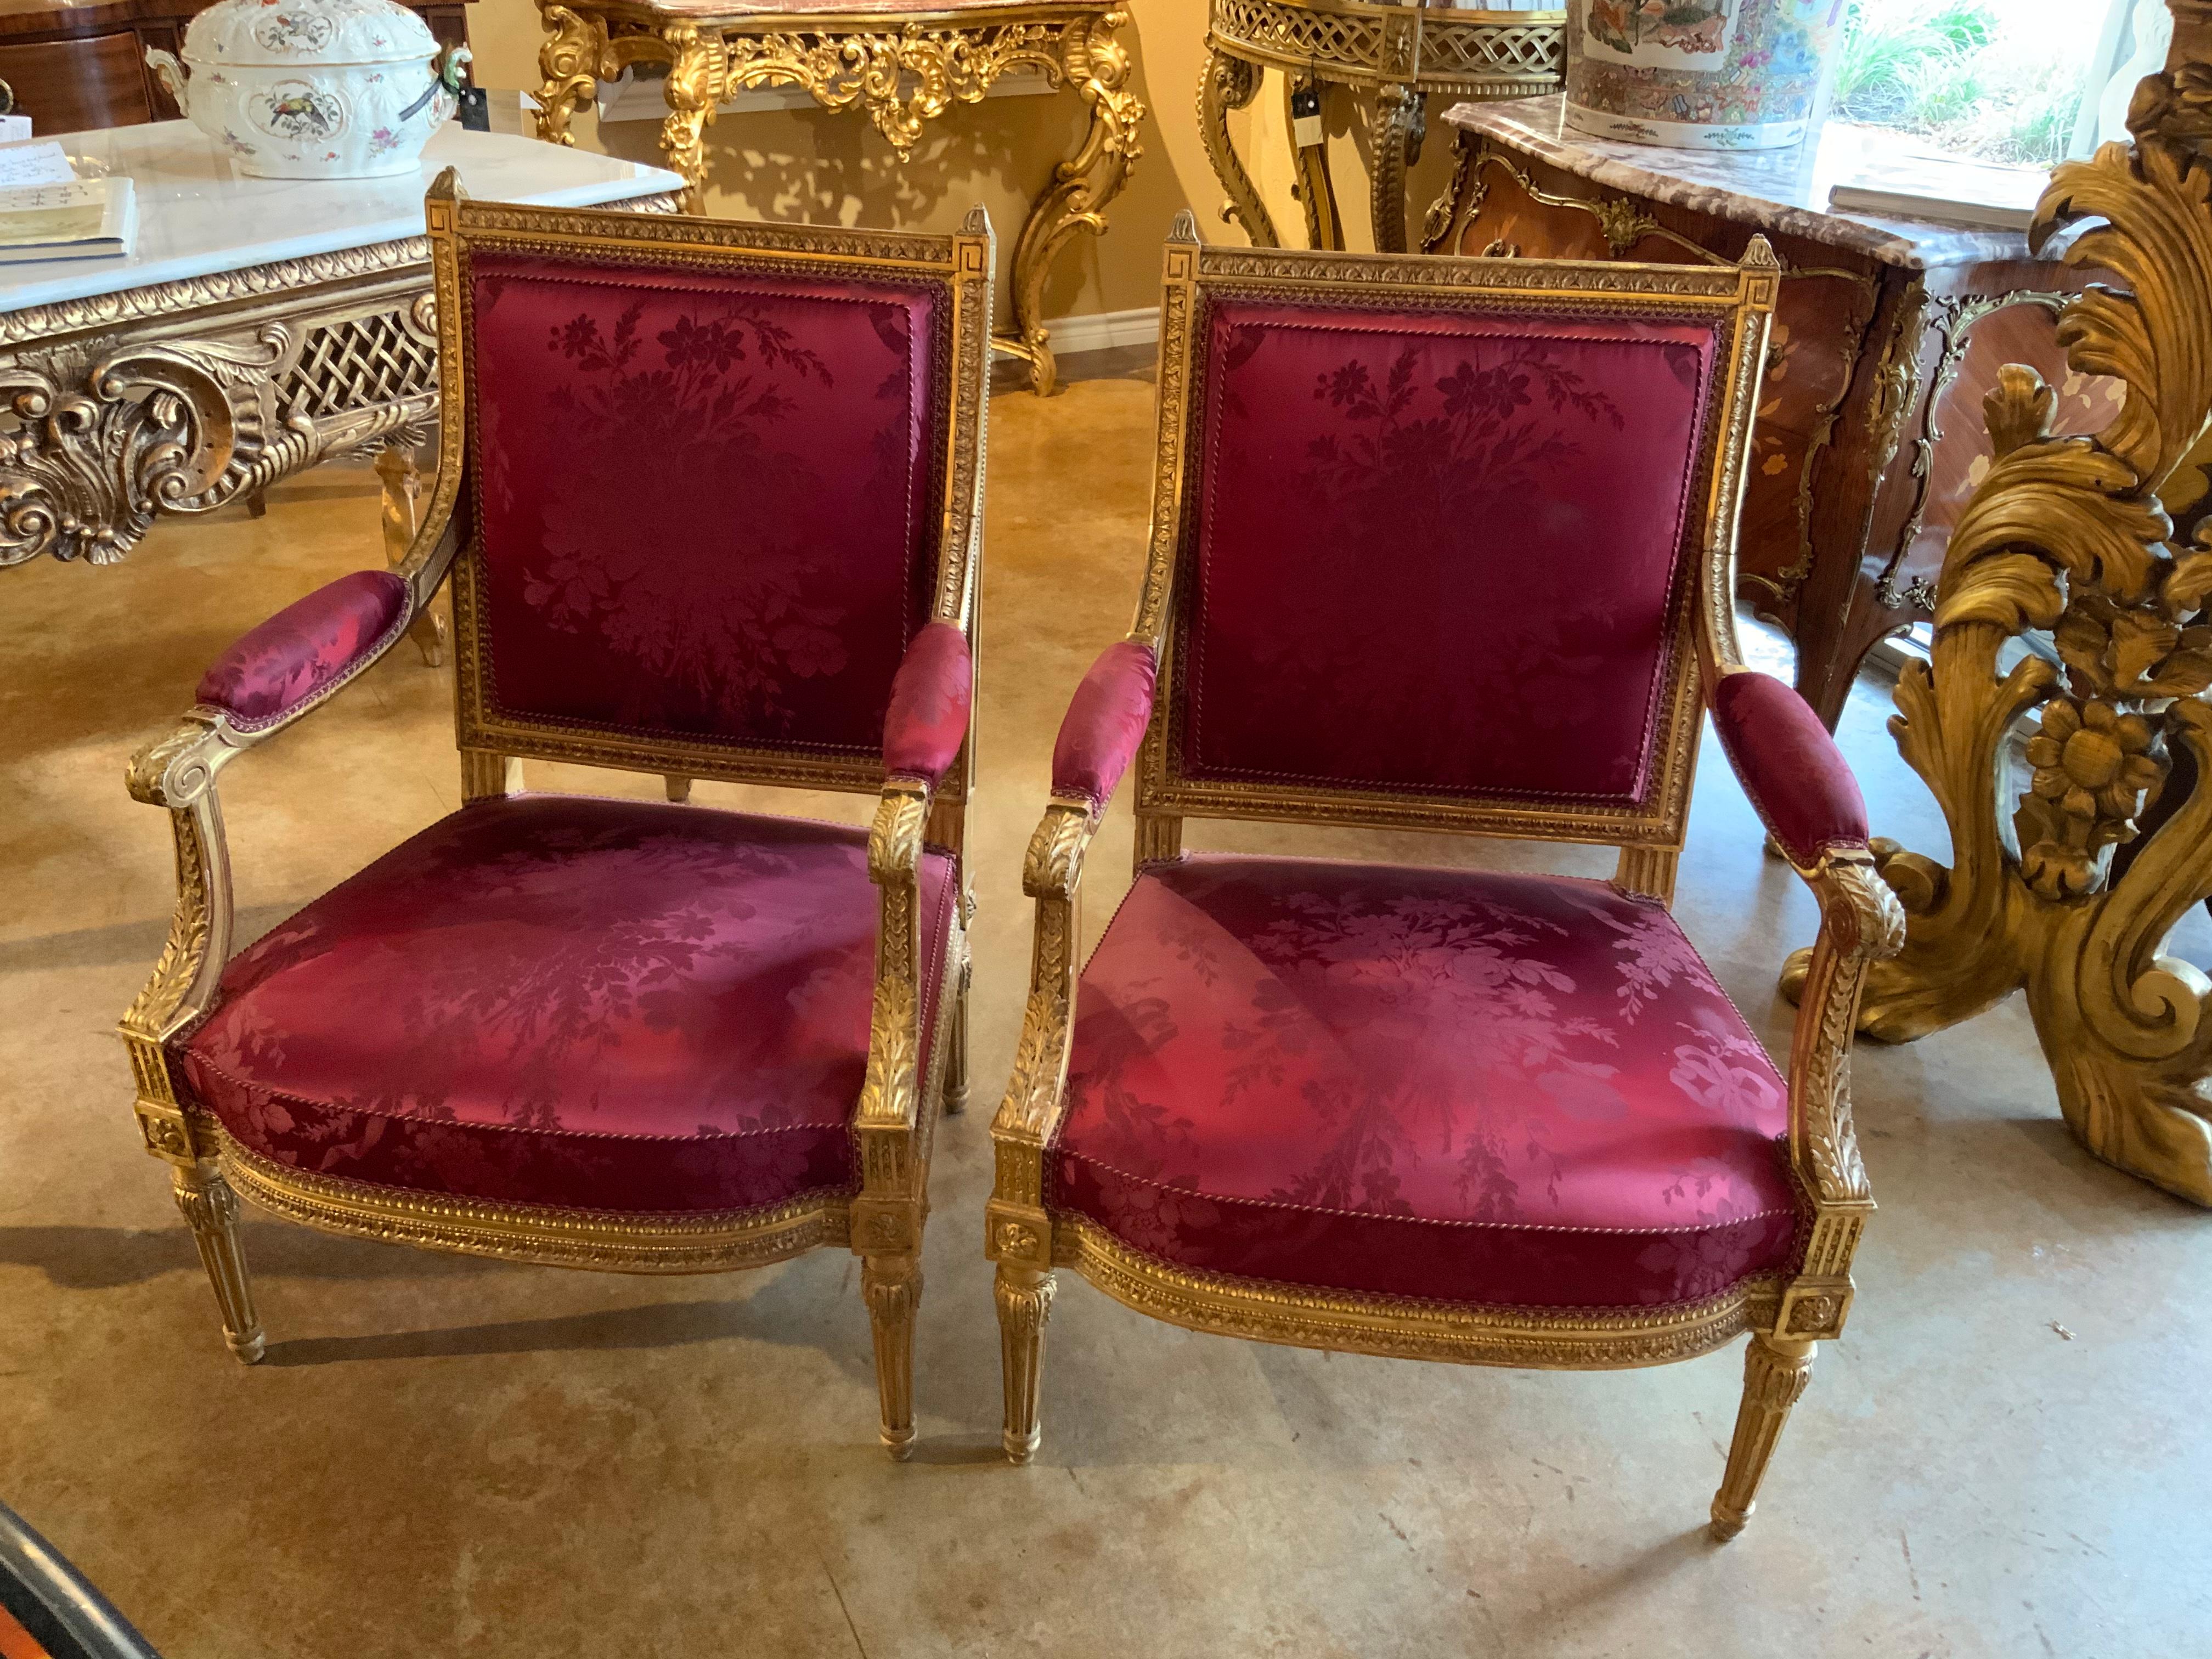 Pair of silk upholstered armchairs with exceptional carving and gilding, 19th century. Louis XVI-style having
a square back and boxed upholstery to the front and a checkered silk upholstery to the back.
The fabric is in great condition and the